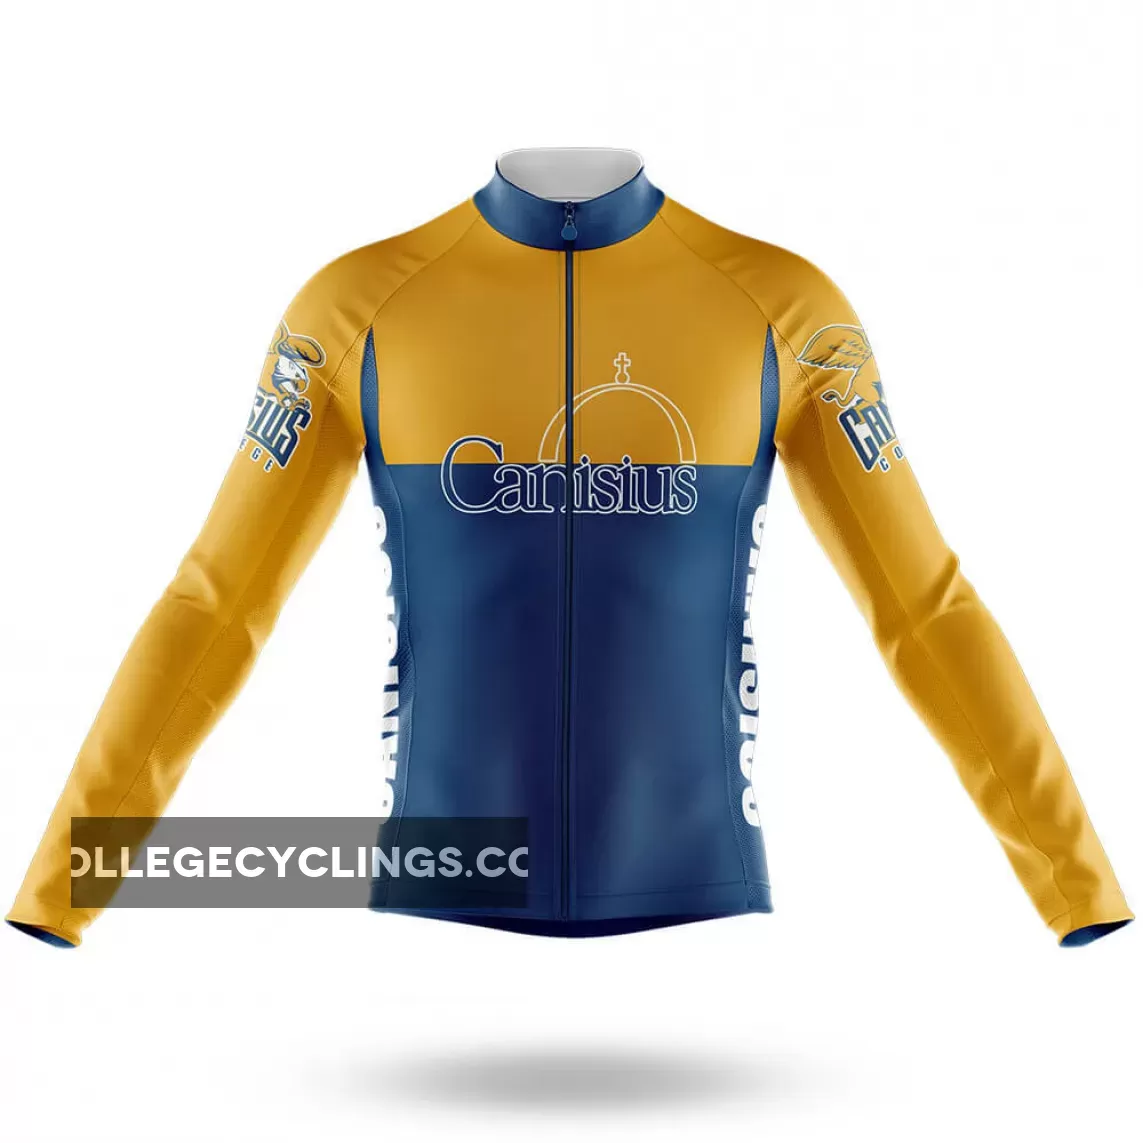 Canisius College Long Sleeve Cycling Jersey Ver.2 For Sale